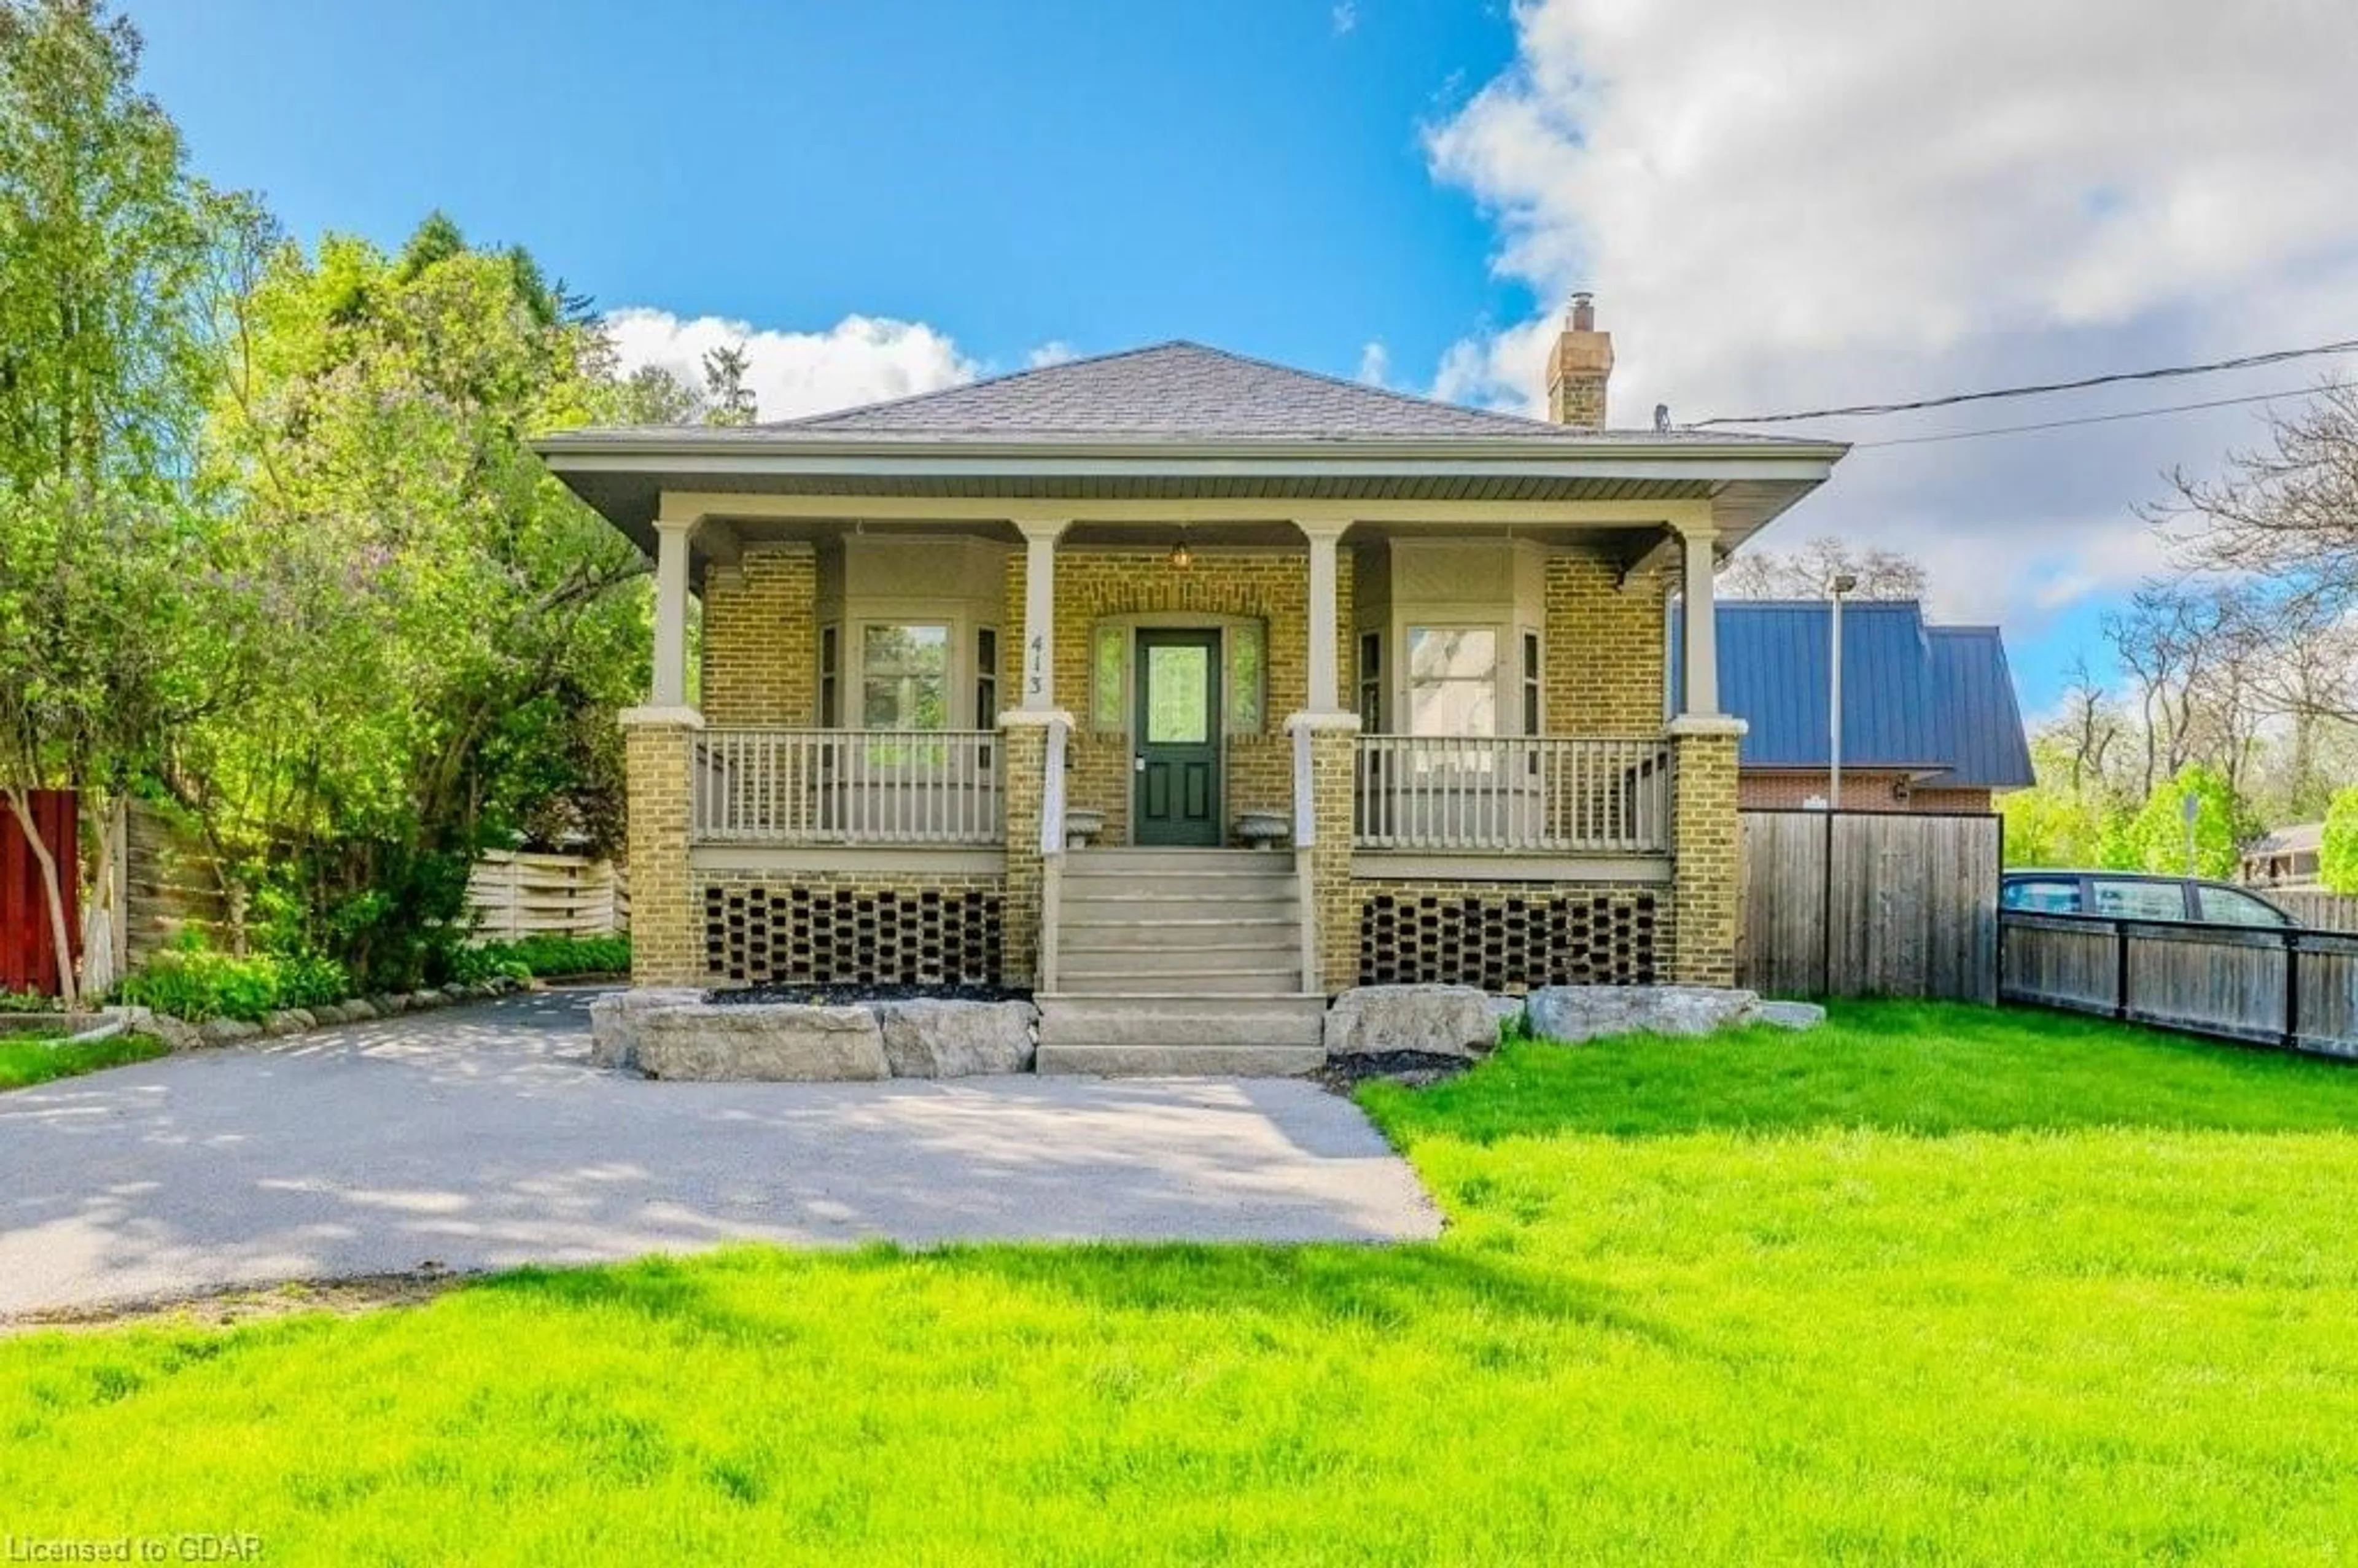 Frontside or backside of a home for 413 Waterloo Ave, Guelph Ontario N1H 3K3